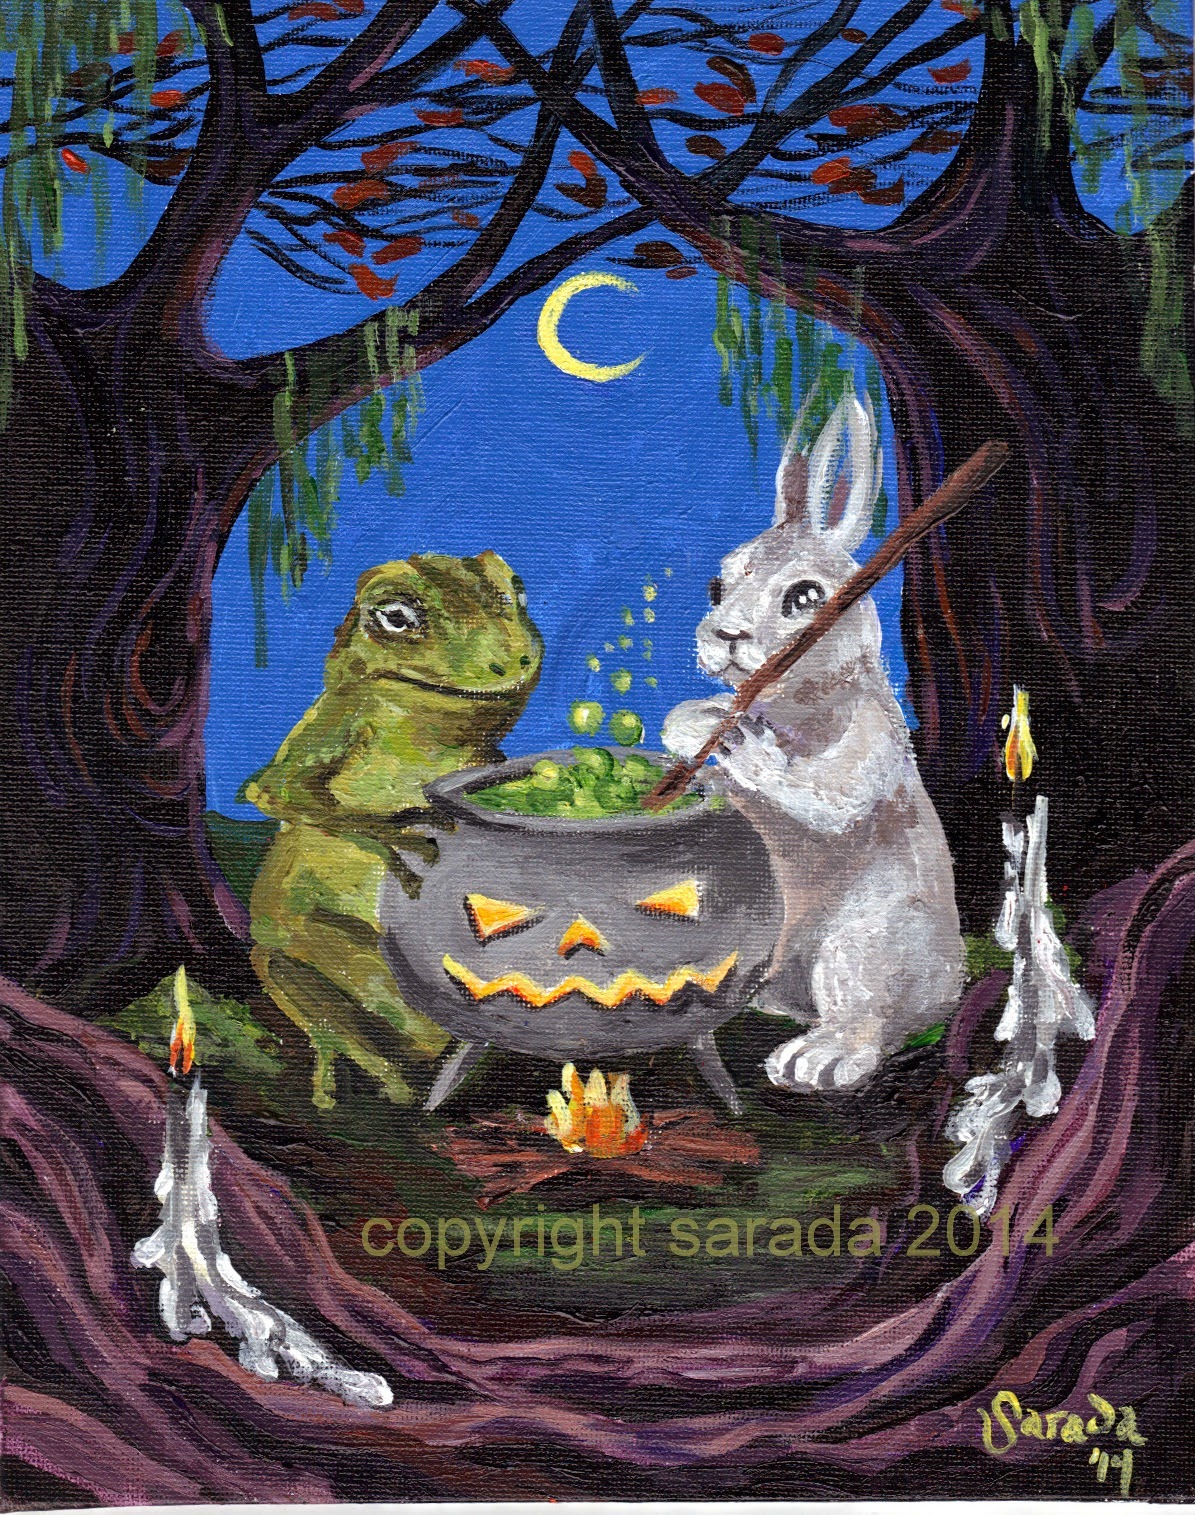 https://www.etsy.com/listing/198311443/halloween-painting-original-8-x-10?ref=shop_home_feat_1